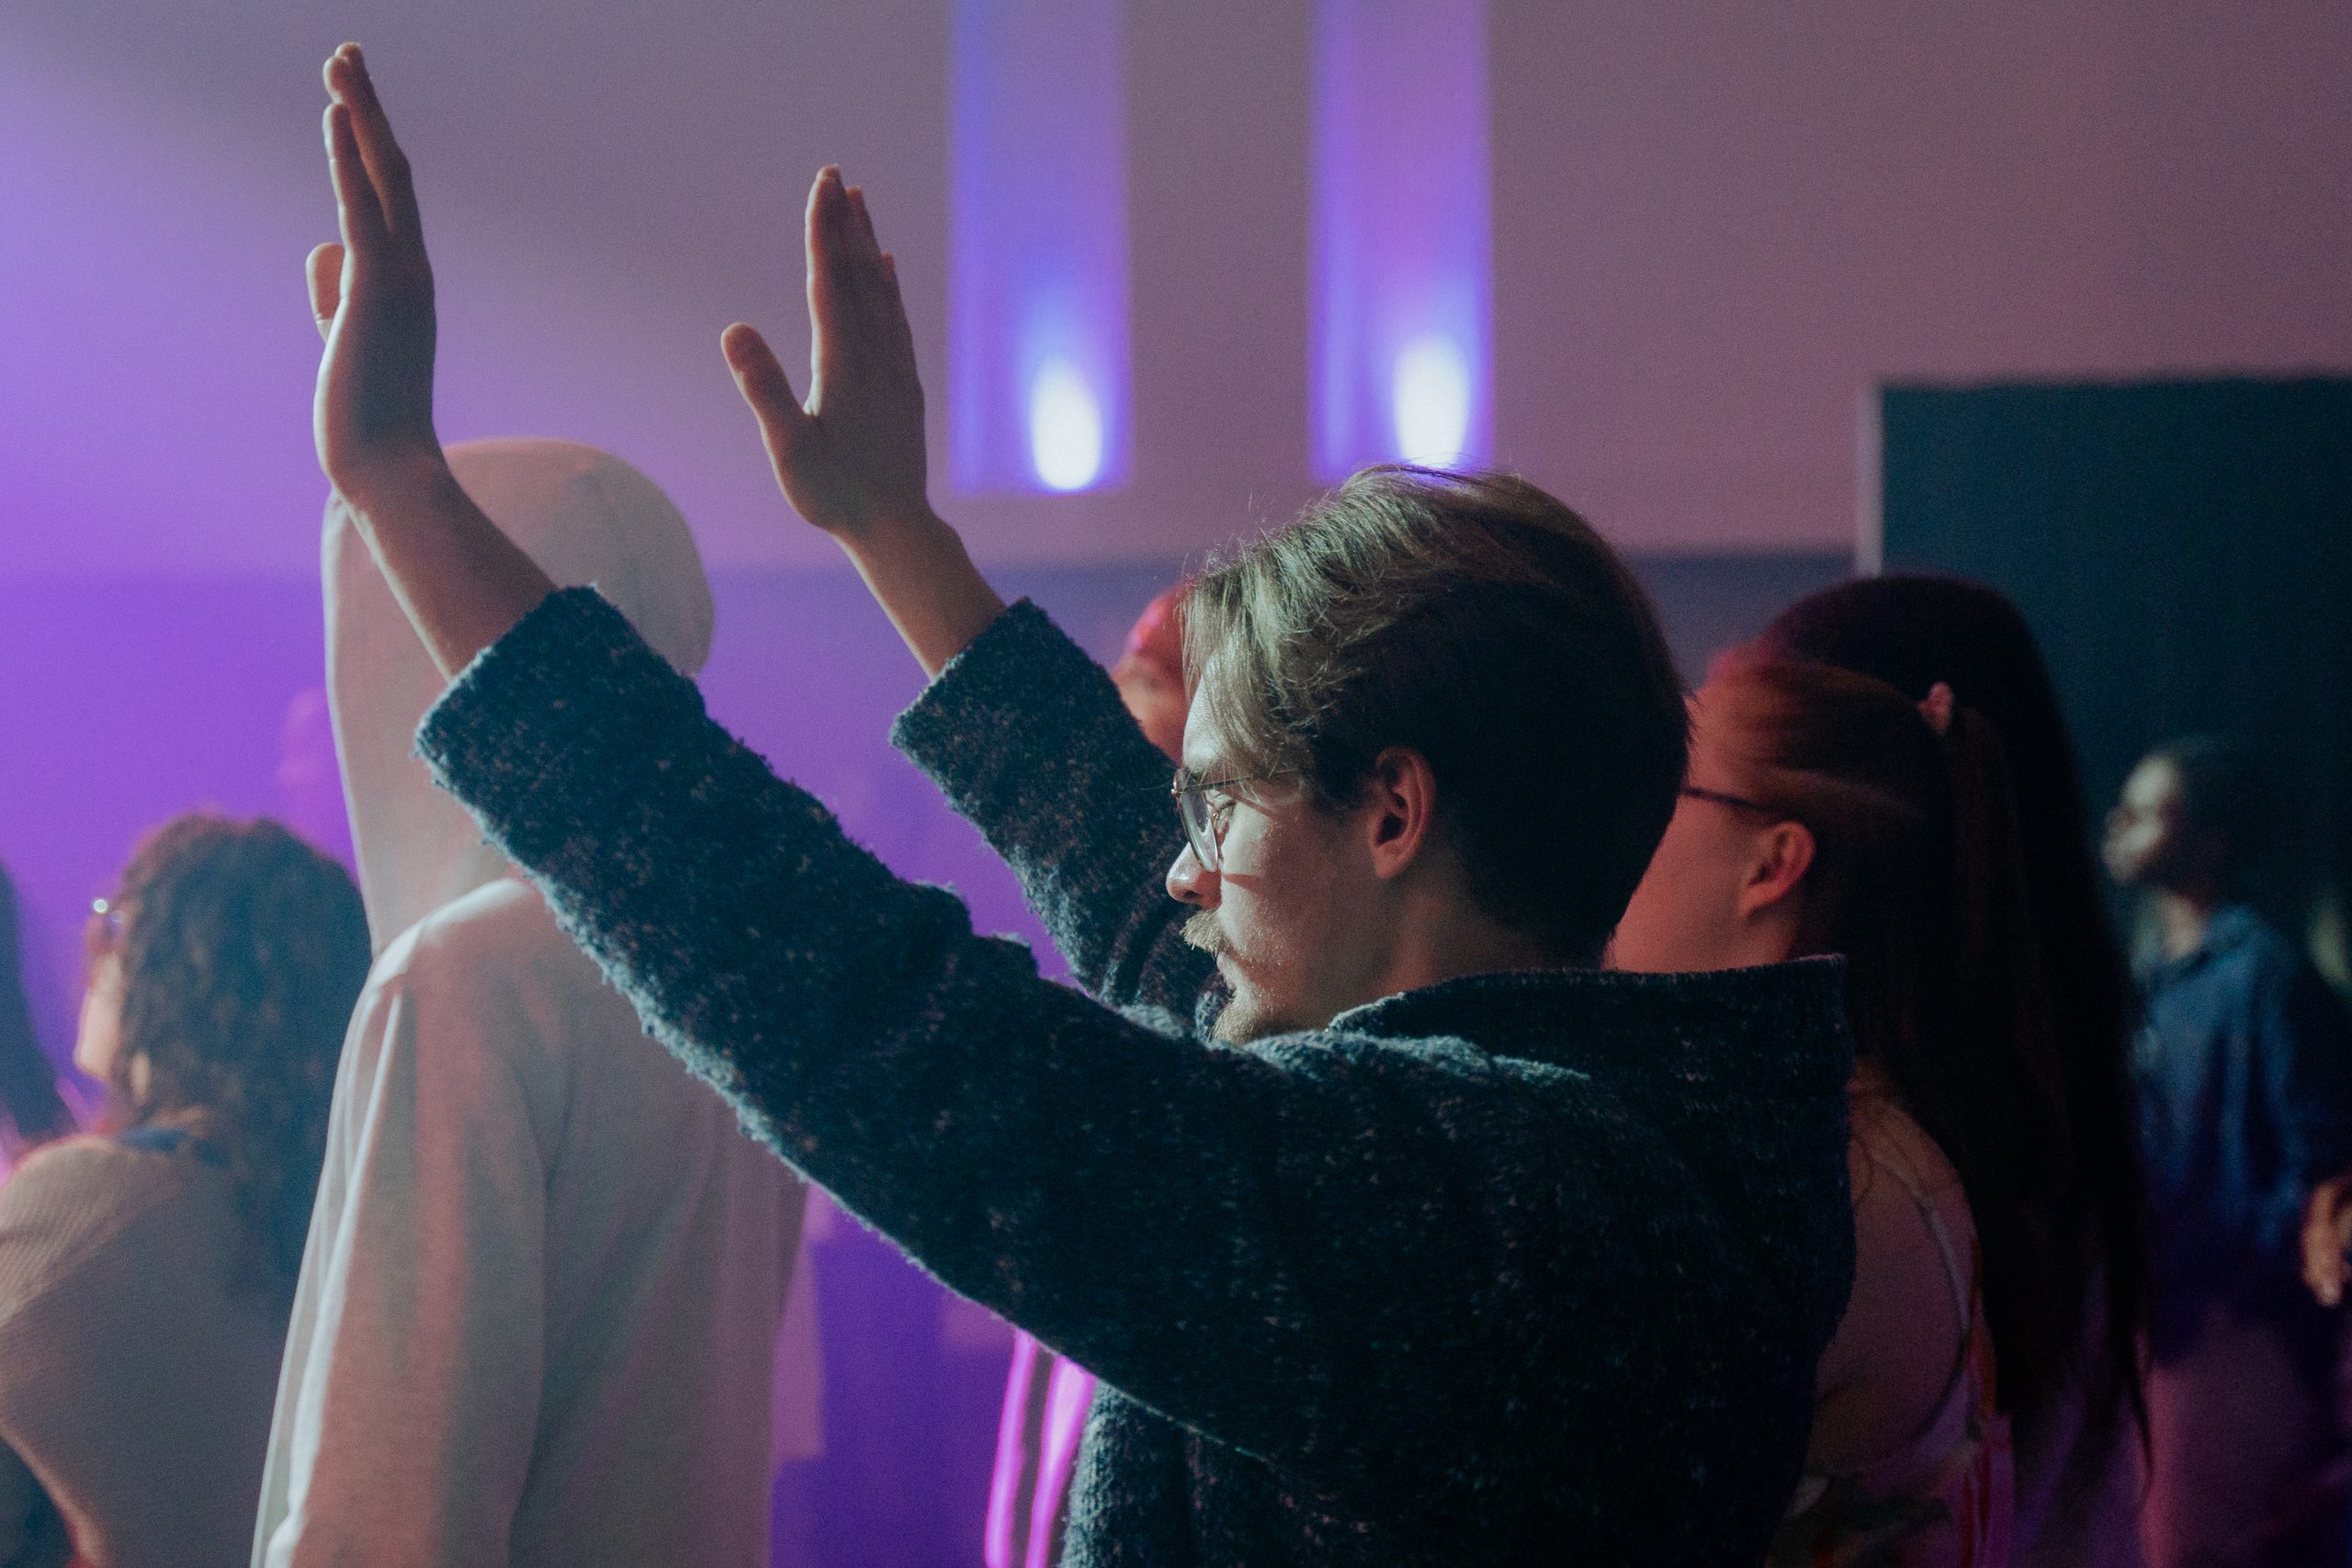 Man worshipping with arms raised.